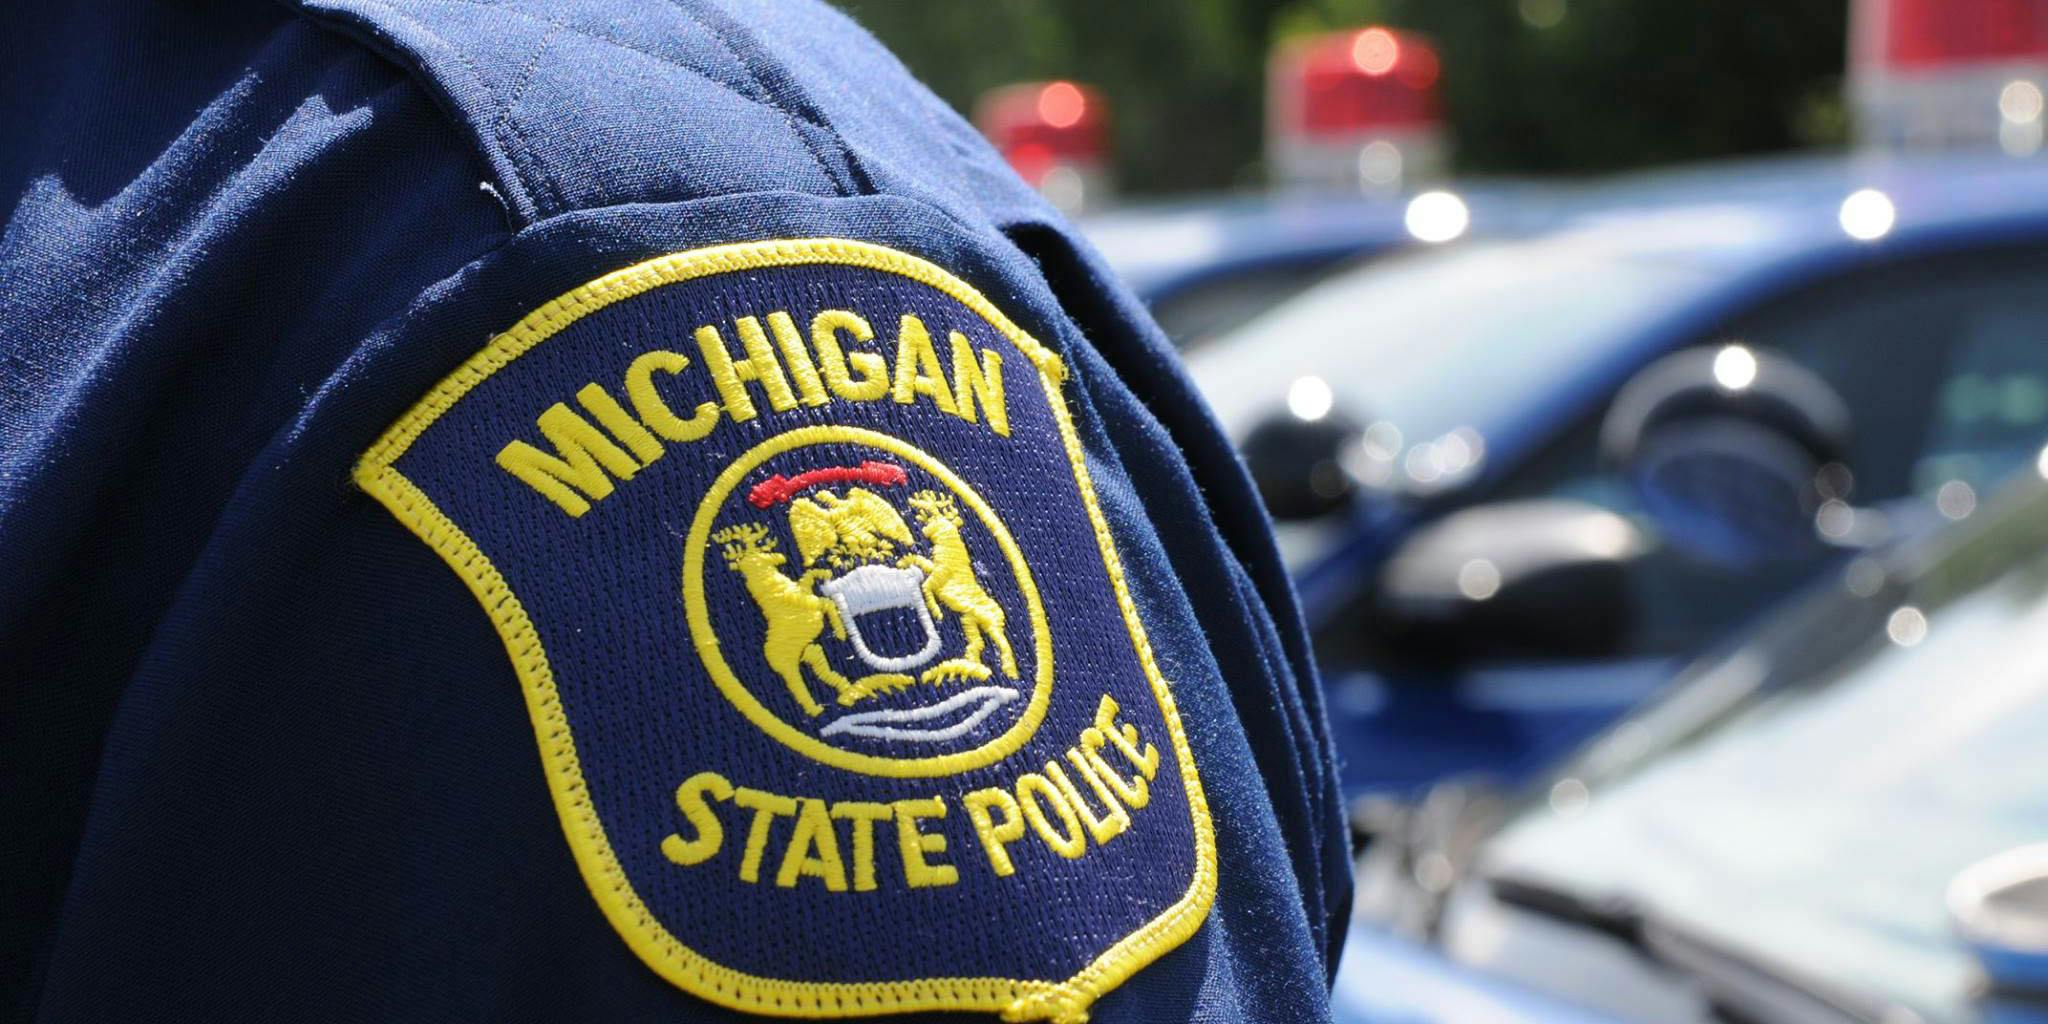 Police in Michigan are being accused of censoring pro-cannabis Facebook comments ahead of the legalization vote.